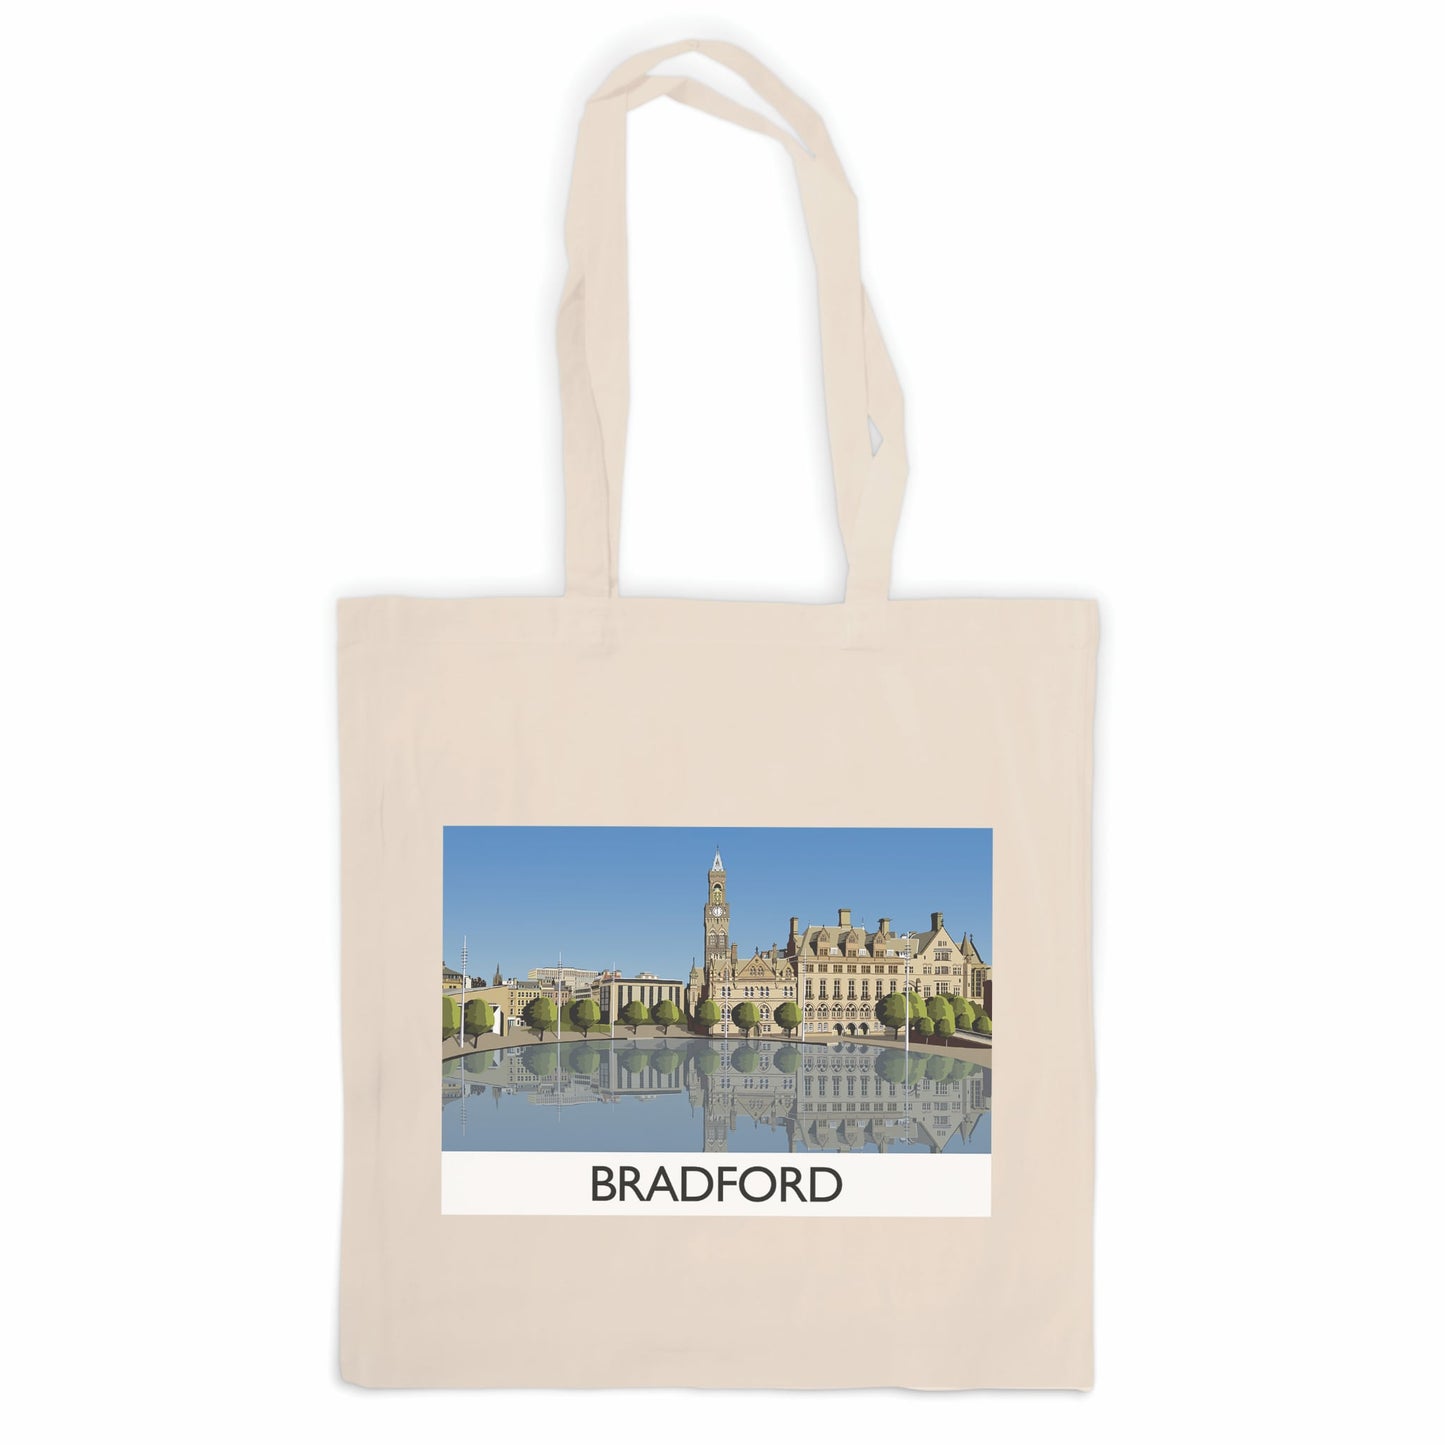 Bradford Tote Bag - The Great Yorkshire Shop